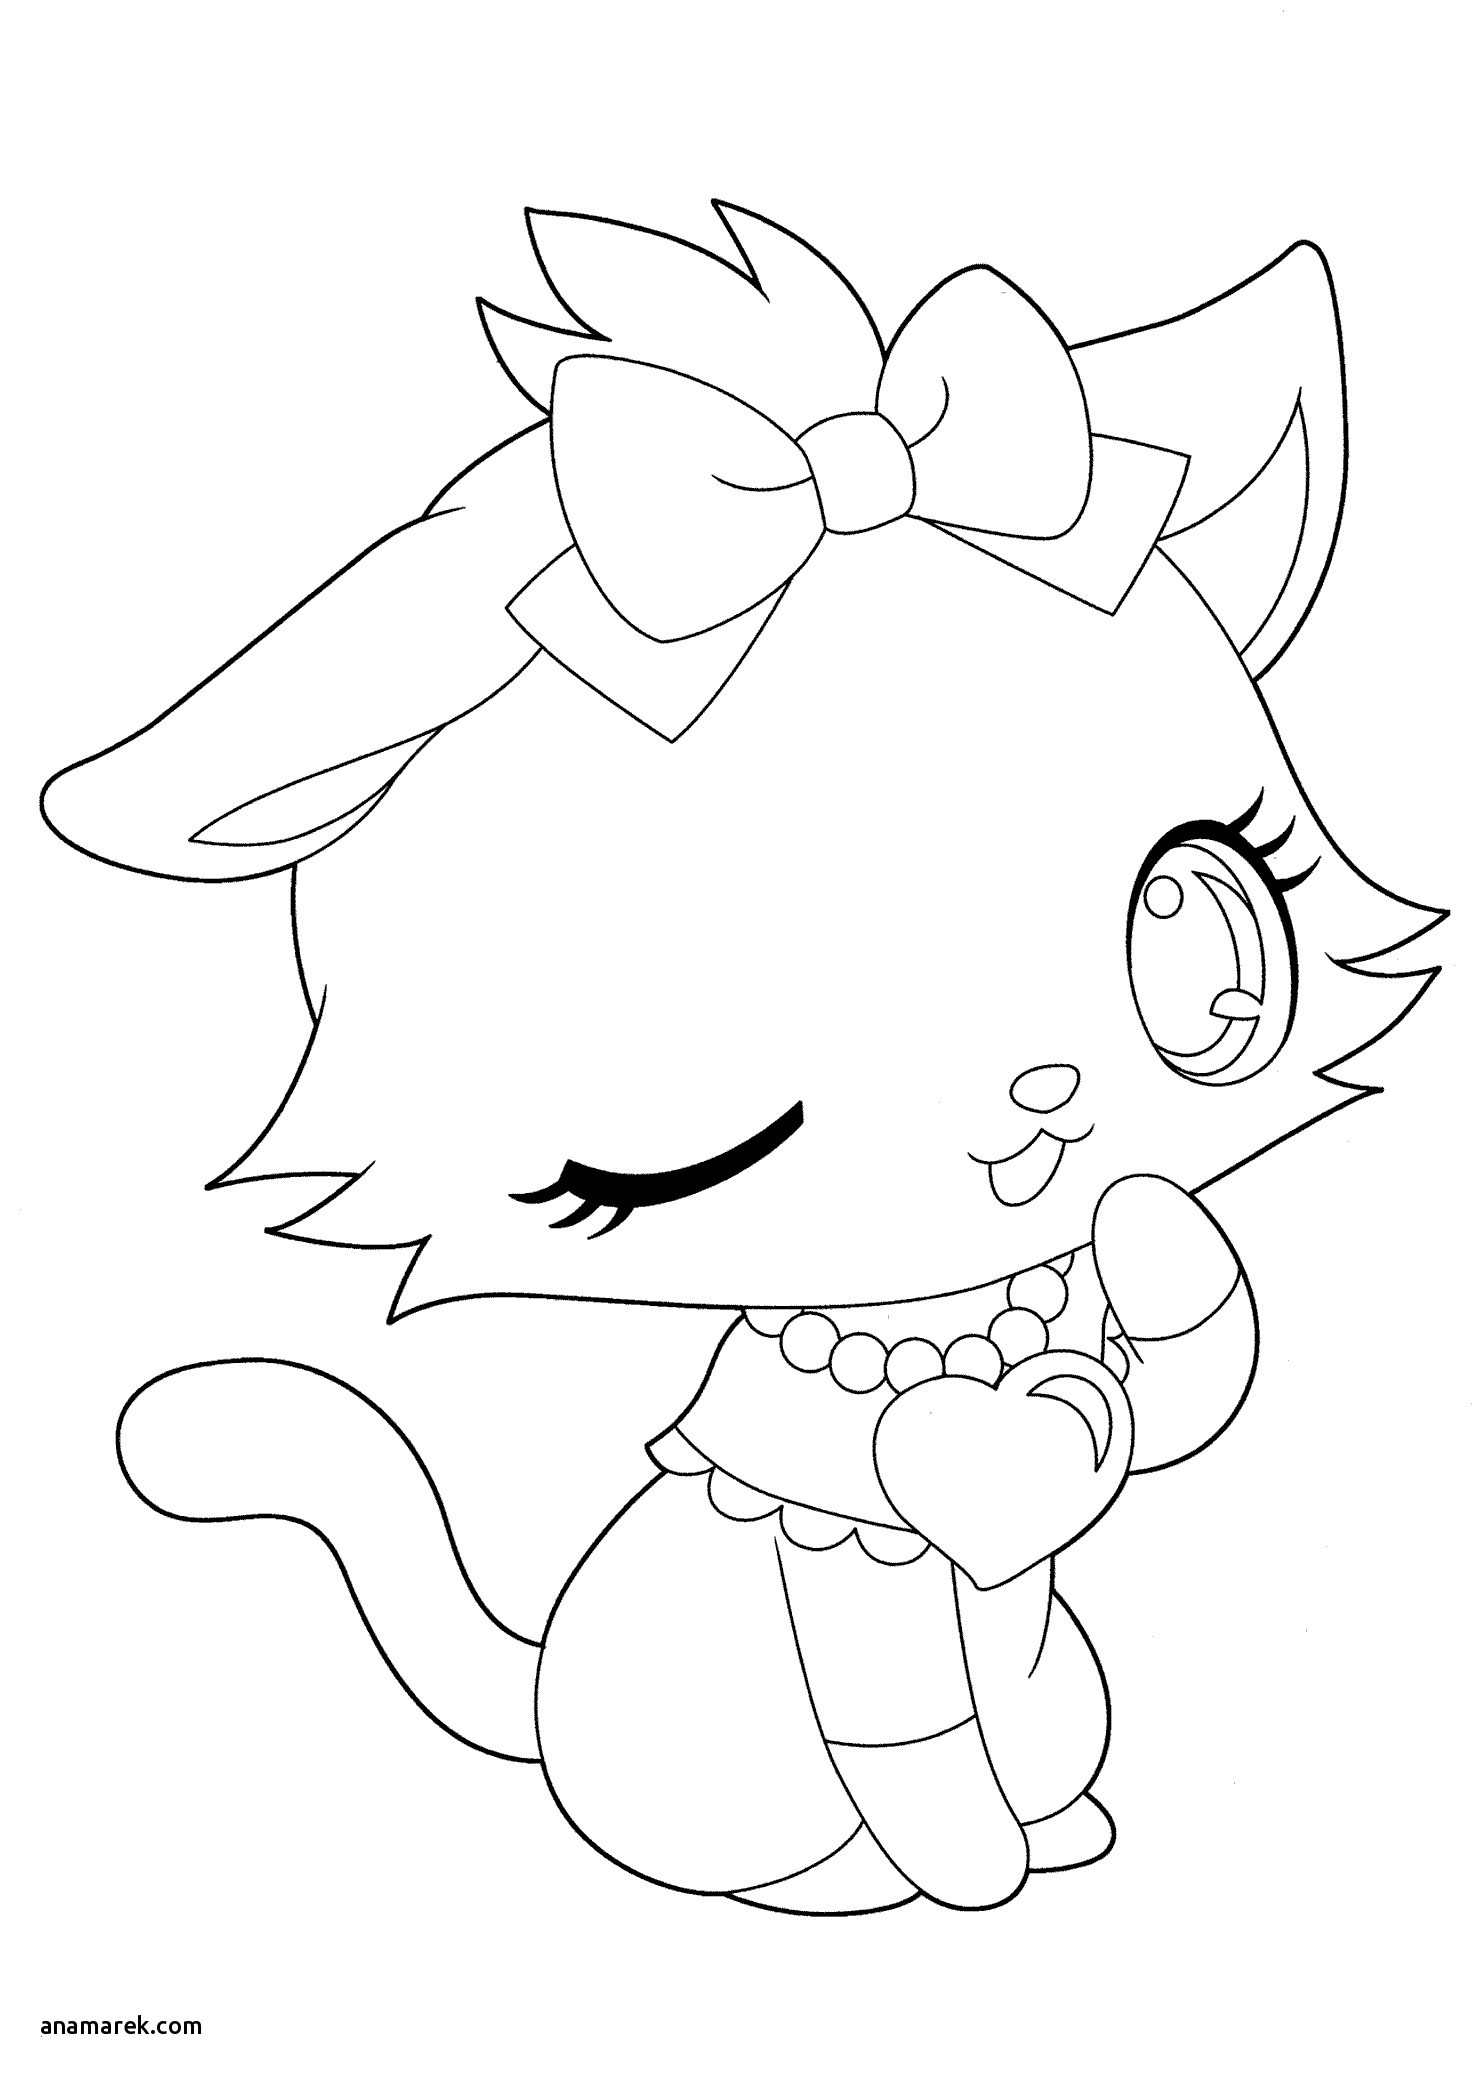 Coloring Pages Of Cute Cats